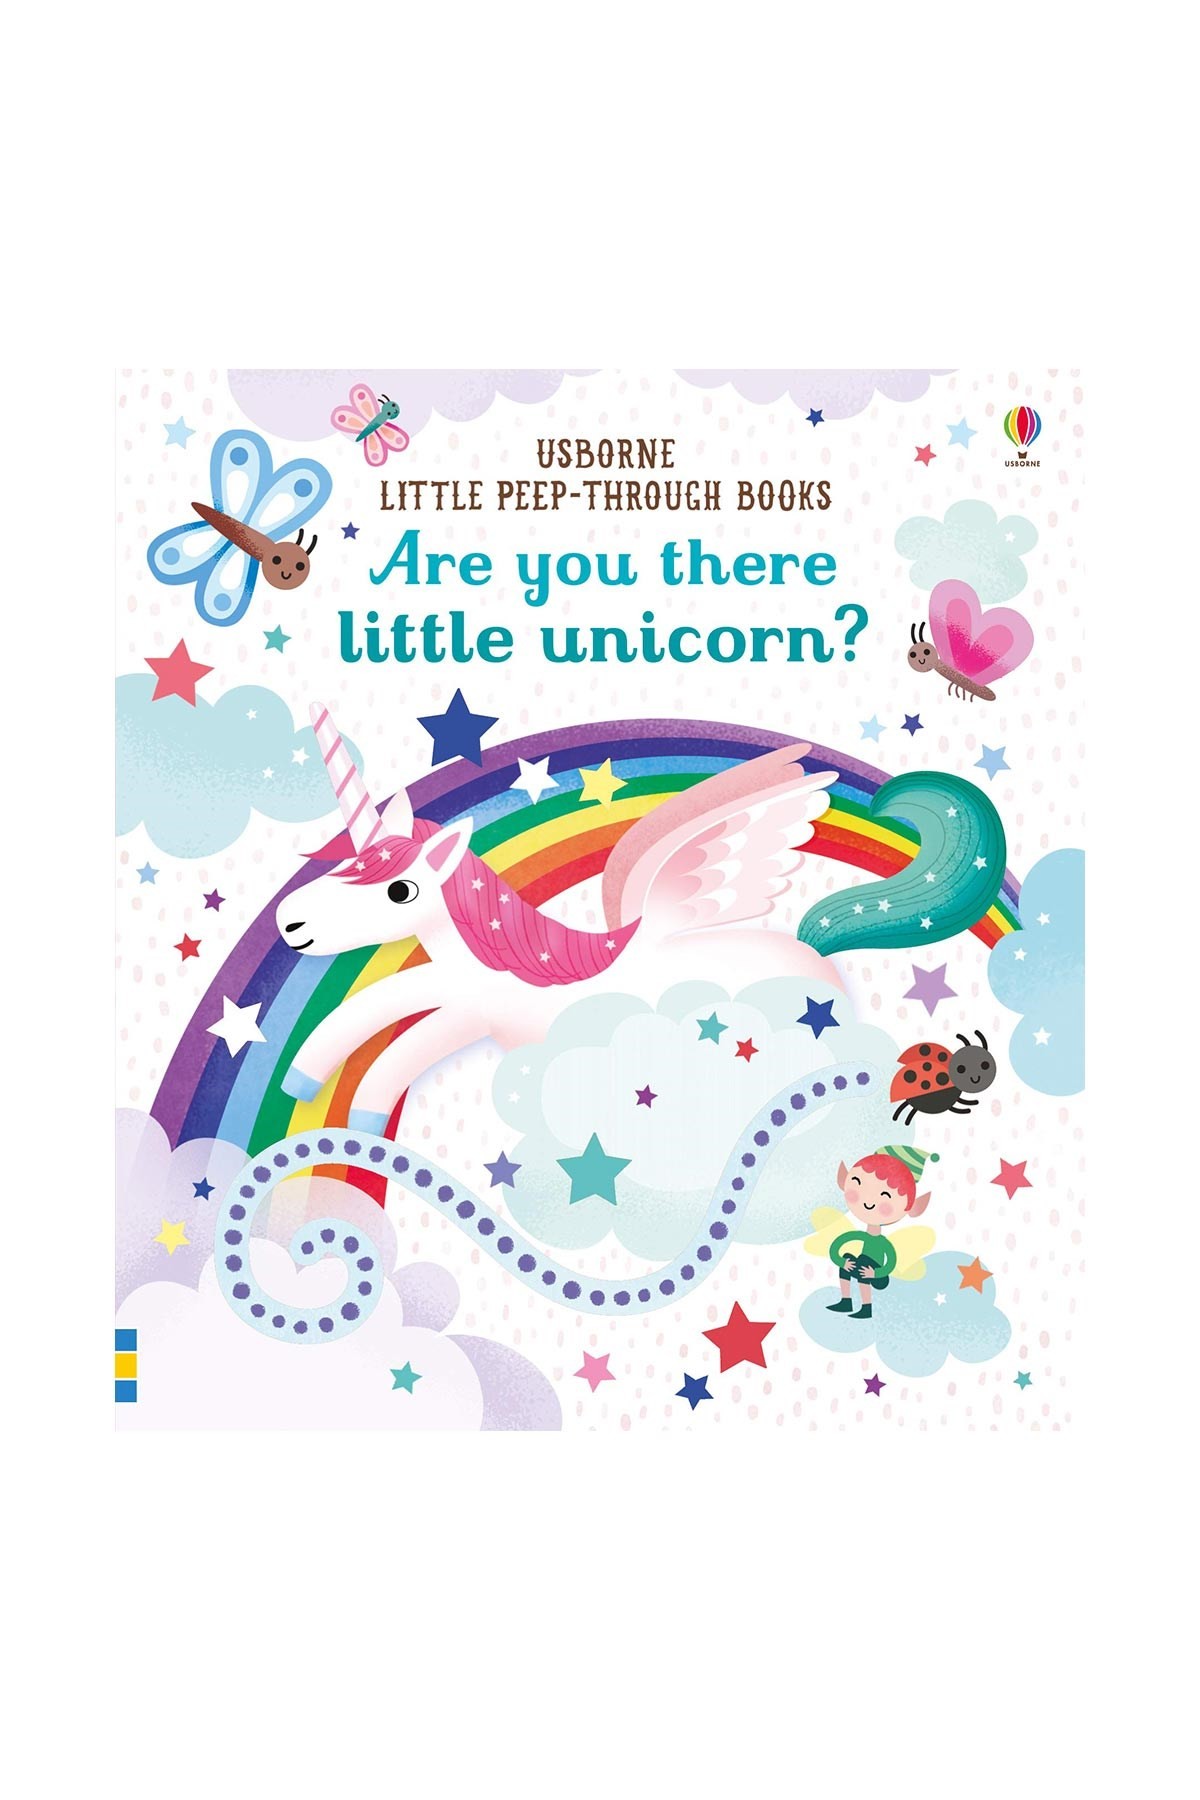 The Usborne Are You There Little Unicorn?